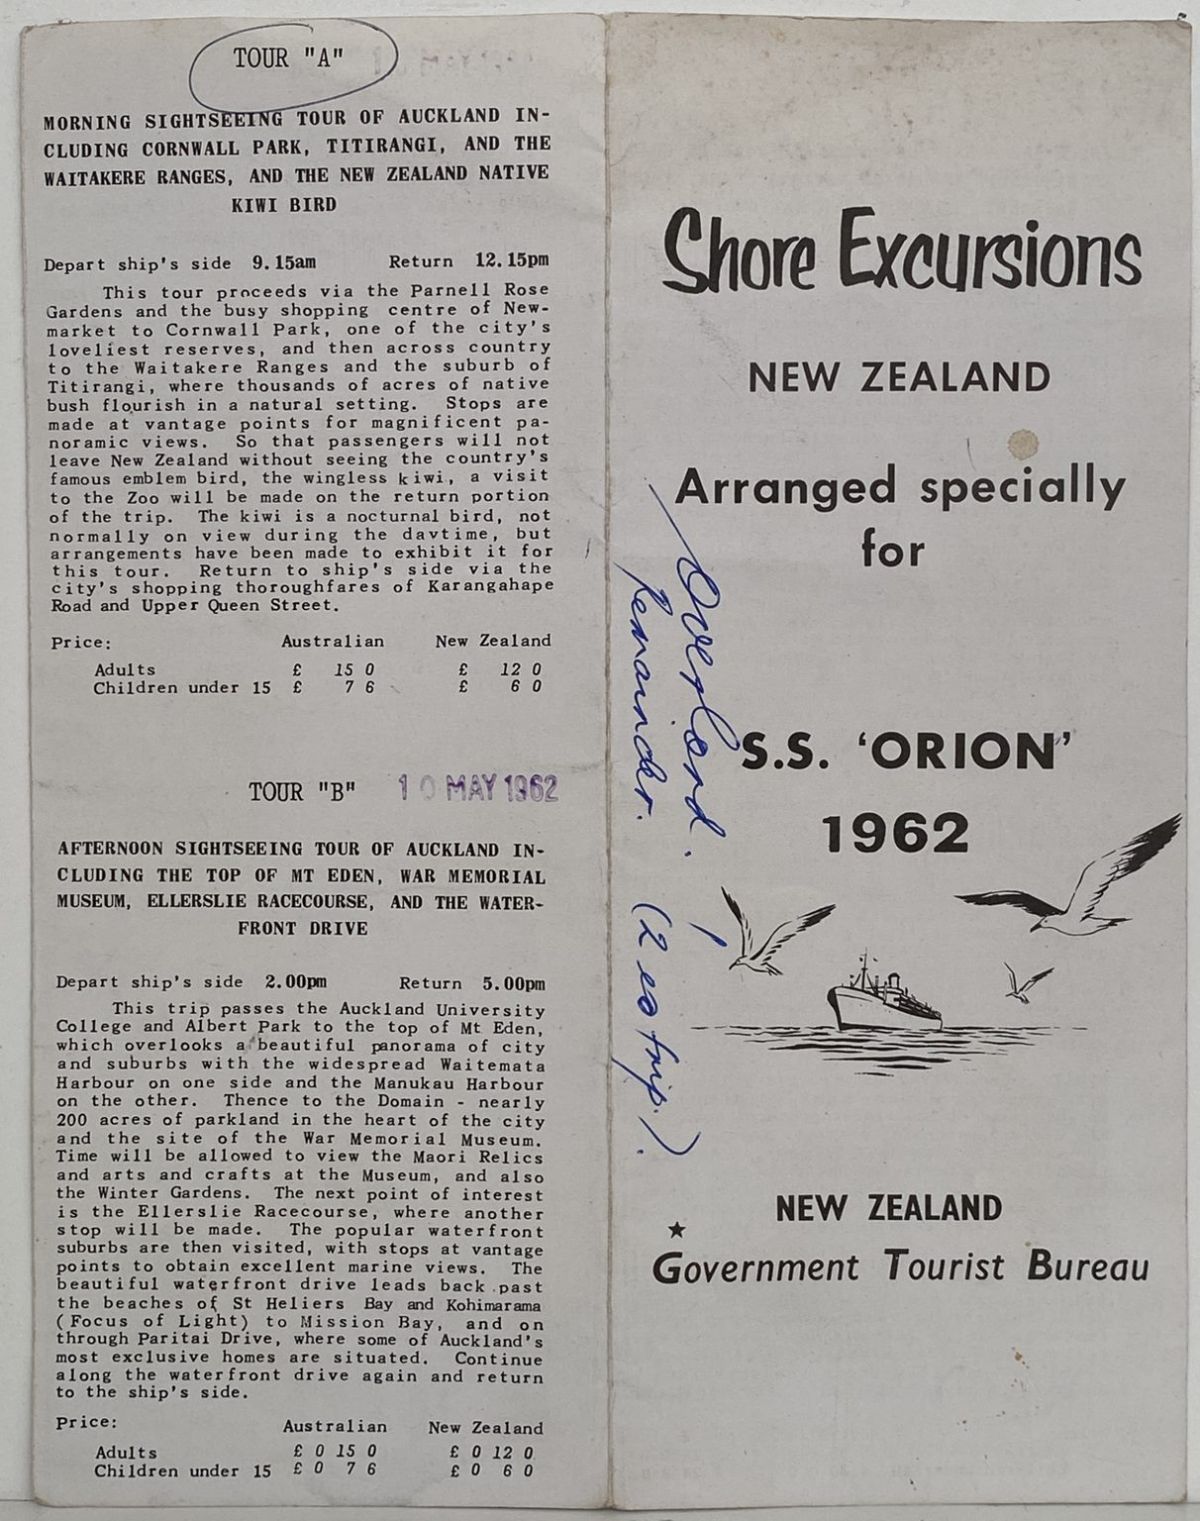 MARITIME MEMORABILIA: Shore excursions for New Zealand for S.S Orion 1962